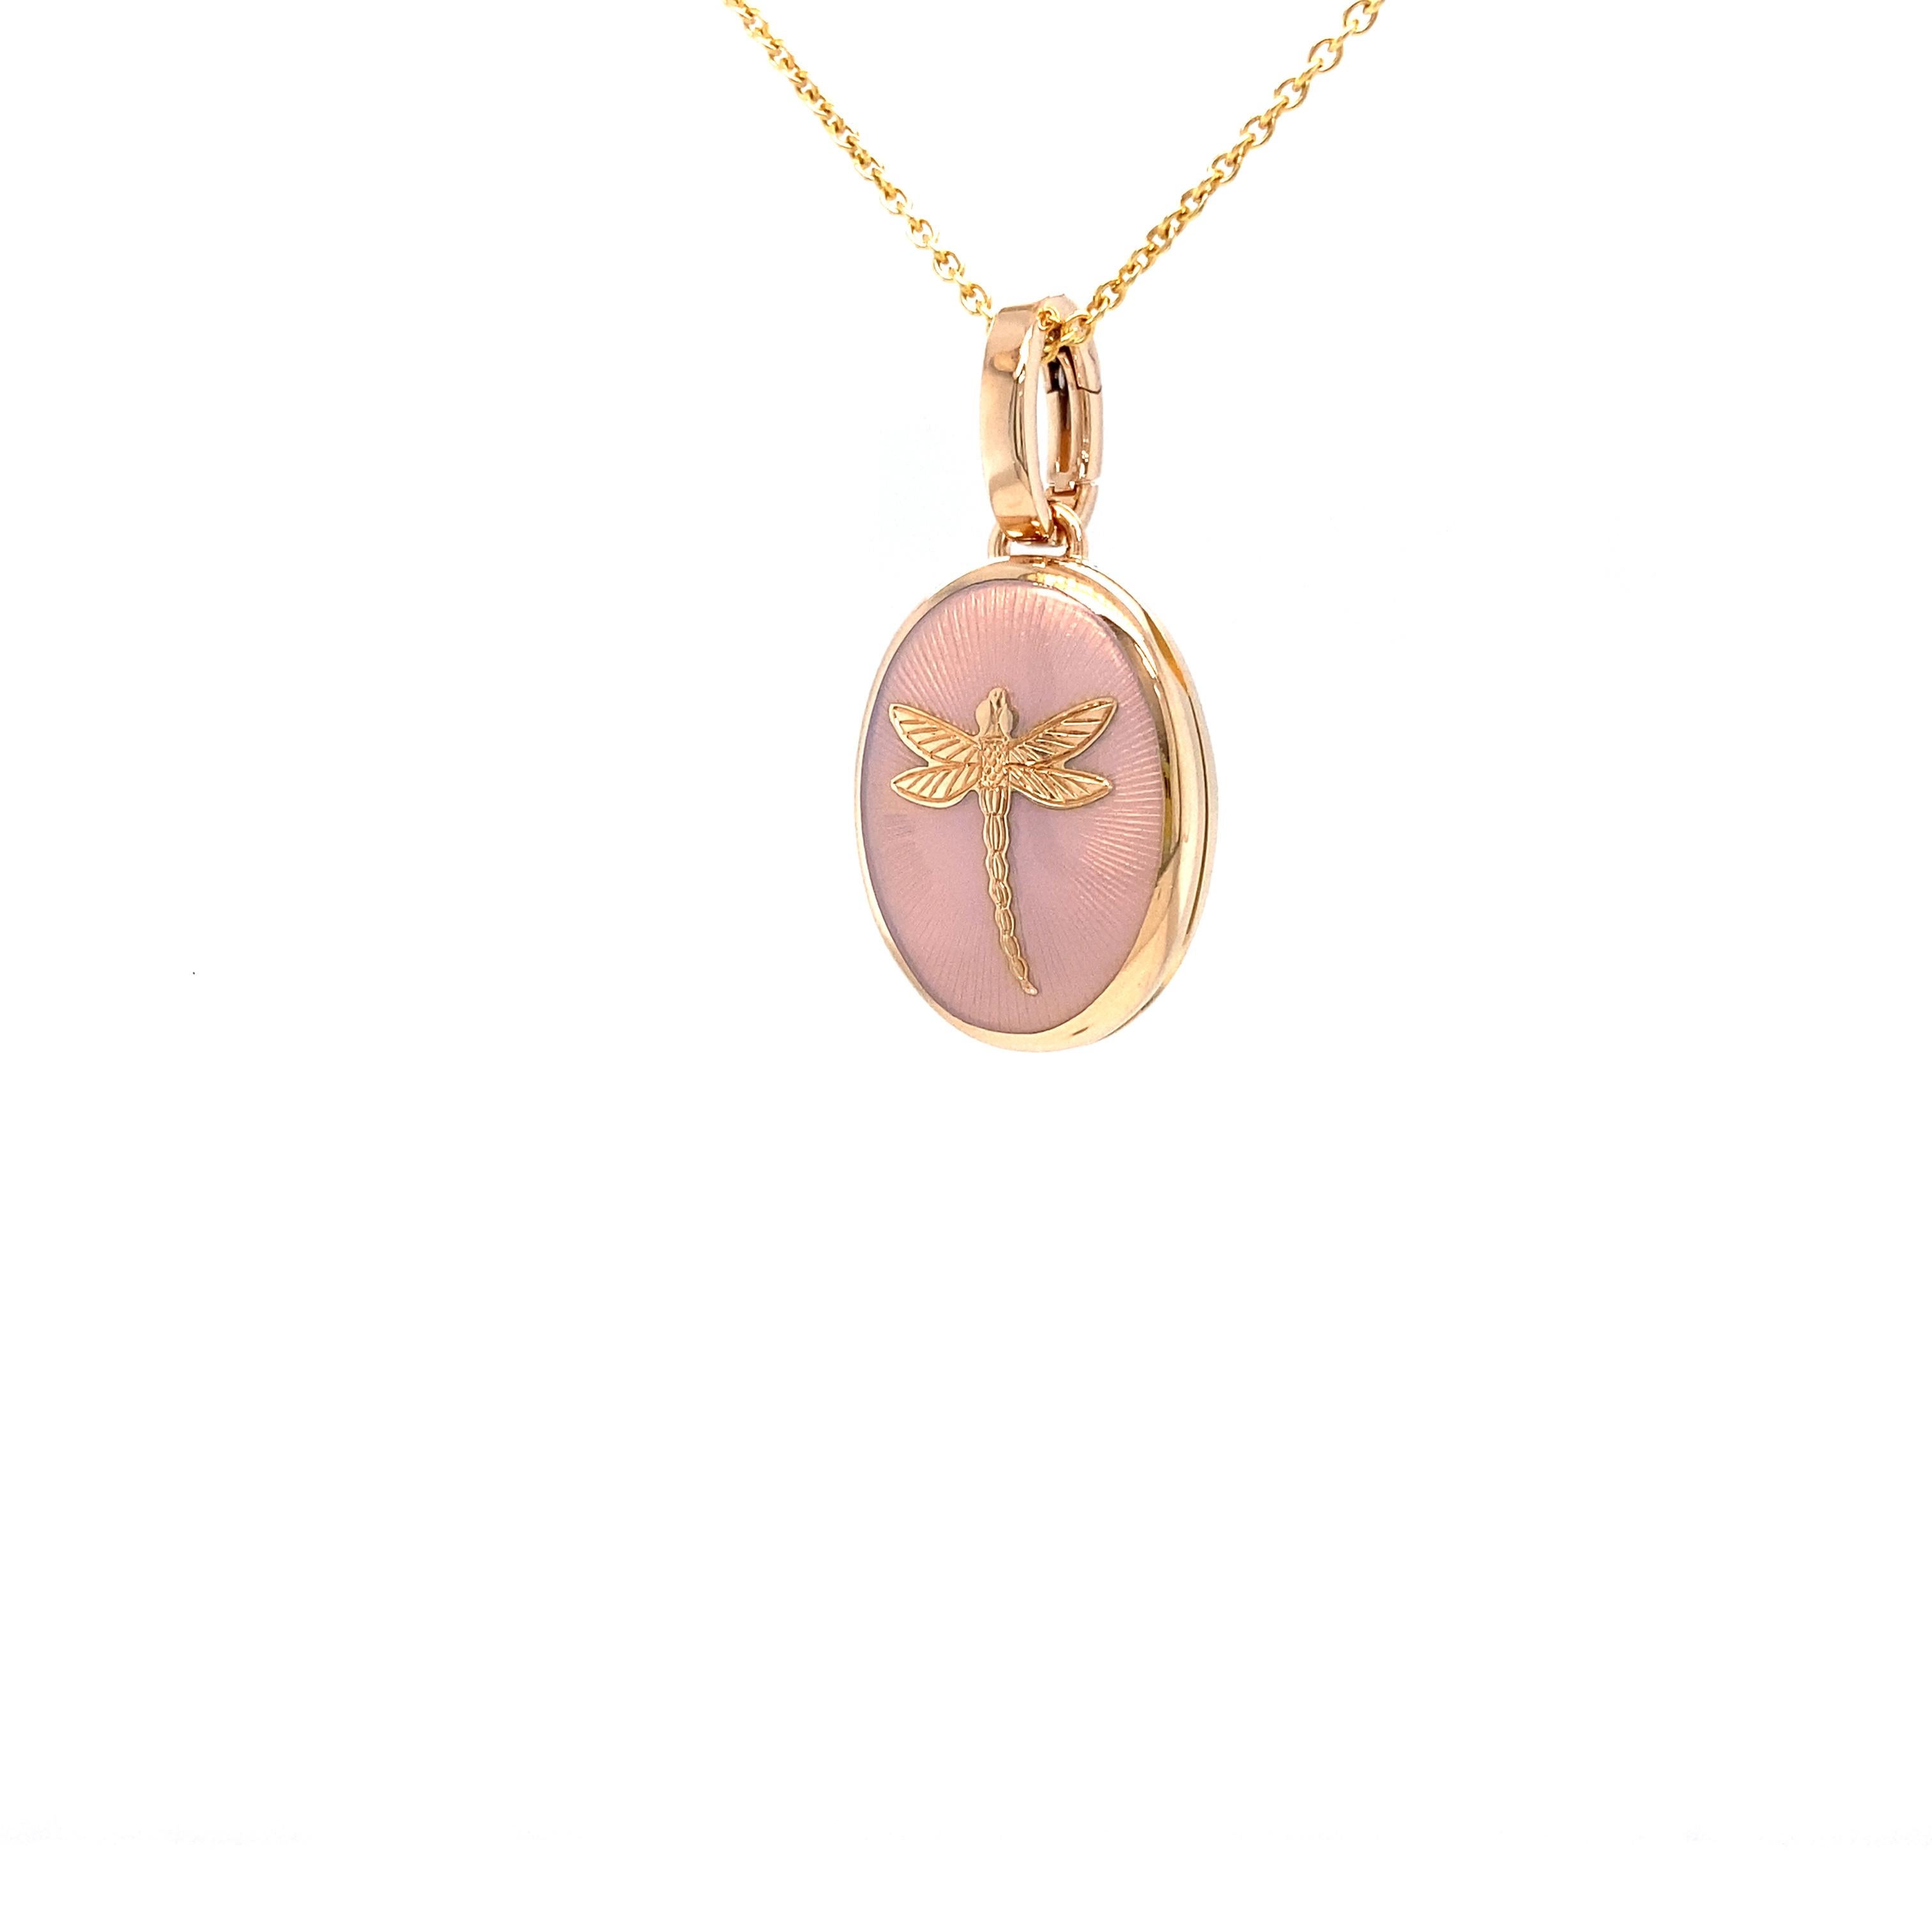 Victor Mayer customizable oval locket pendant necklace with dragonfly 18k rose gold, Hallmark collection, translucent opalescent pink vitreous enamel, guilloche, measurements app. 15.0 mm x 20.0 mm

About the creator Victor Mayer
Victor Mayer is